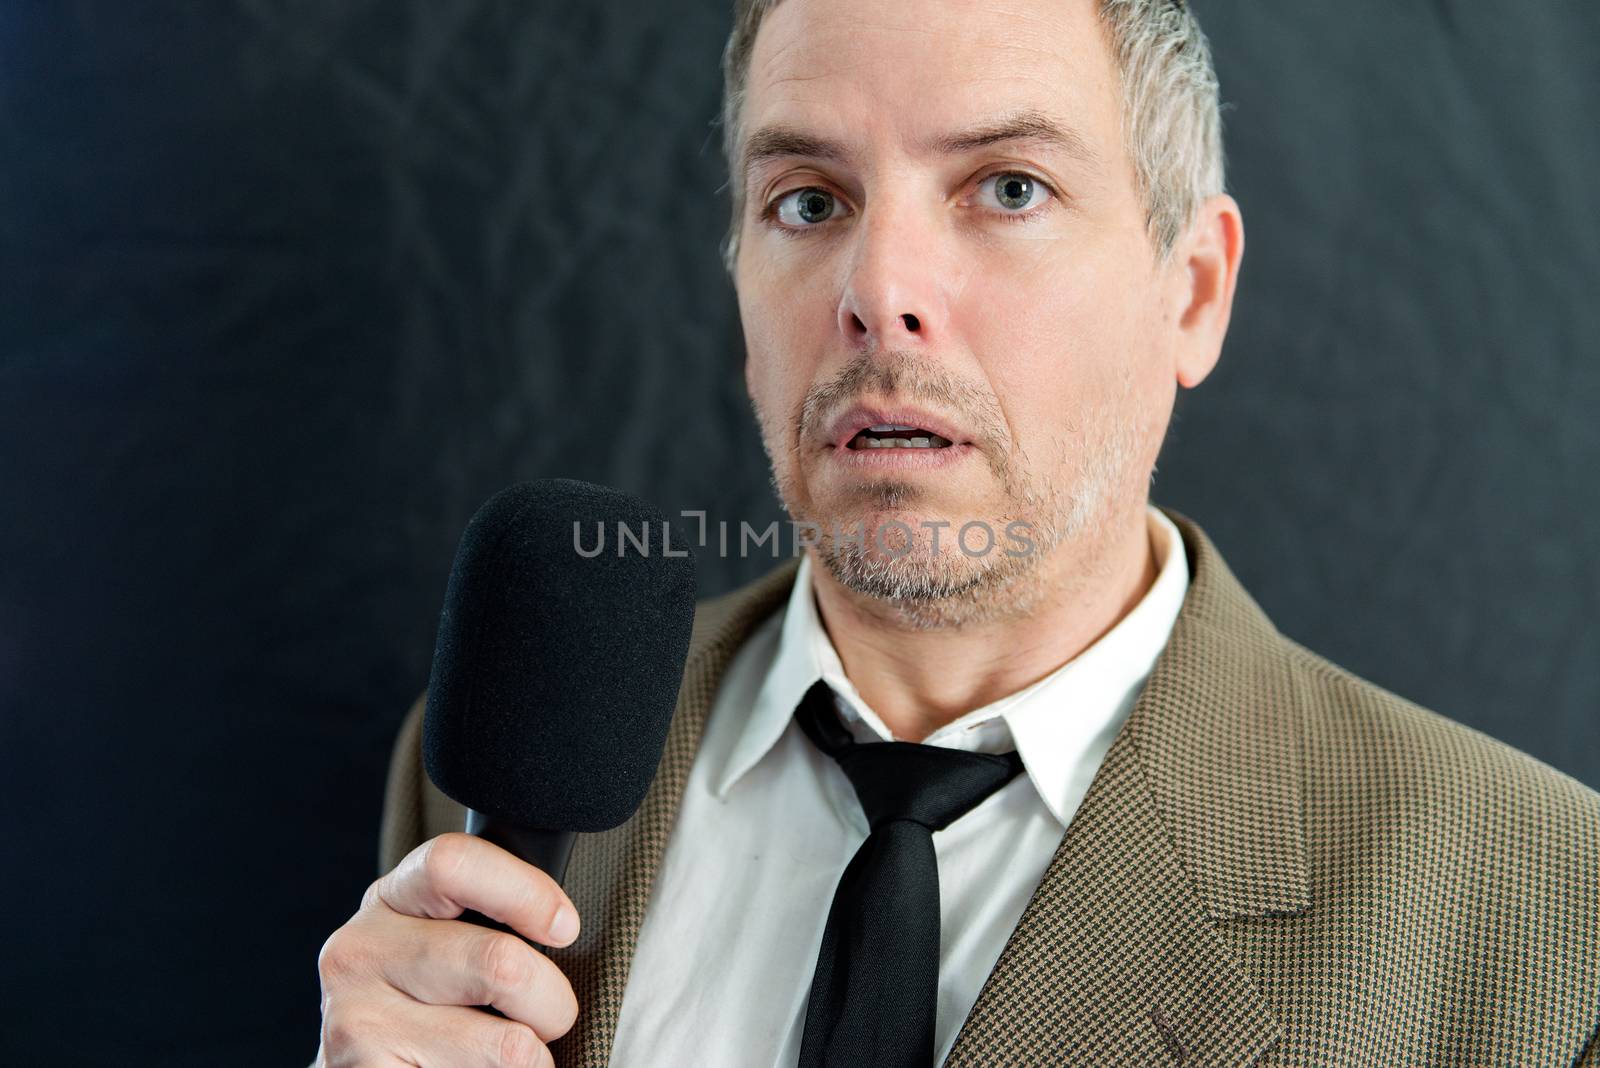 Close-up of a depressed man speaking into microphone.